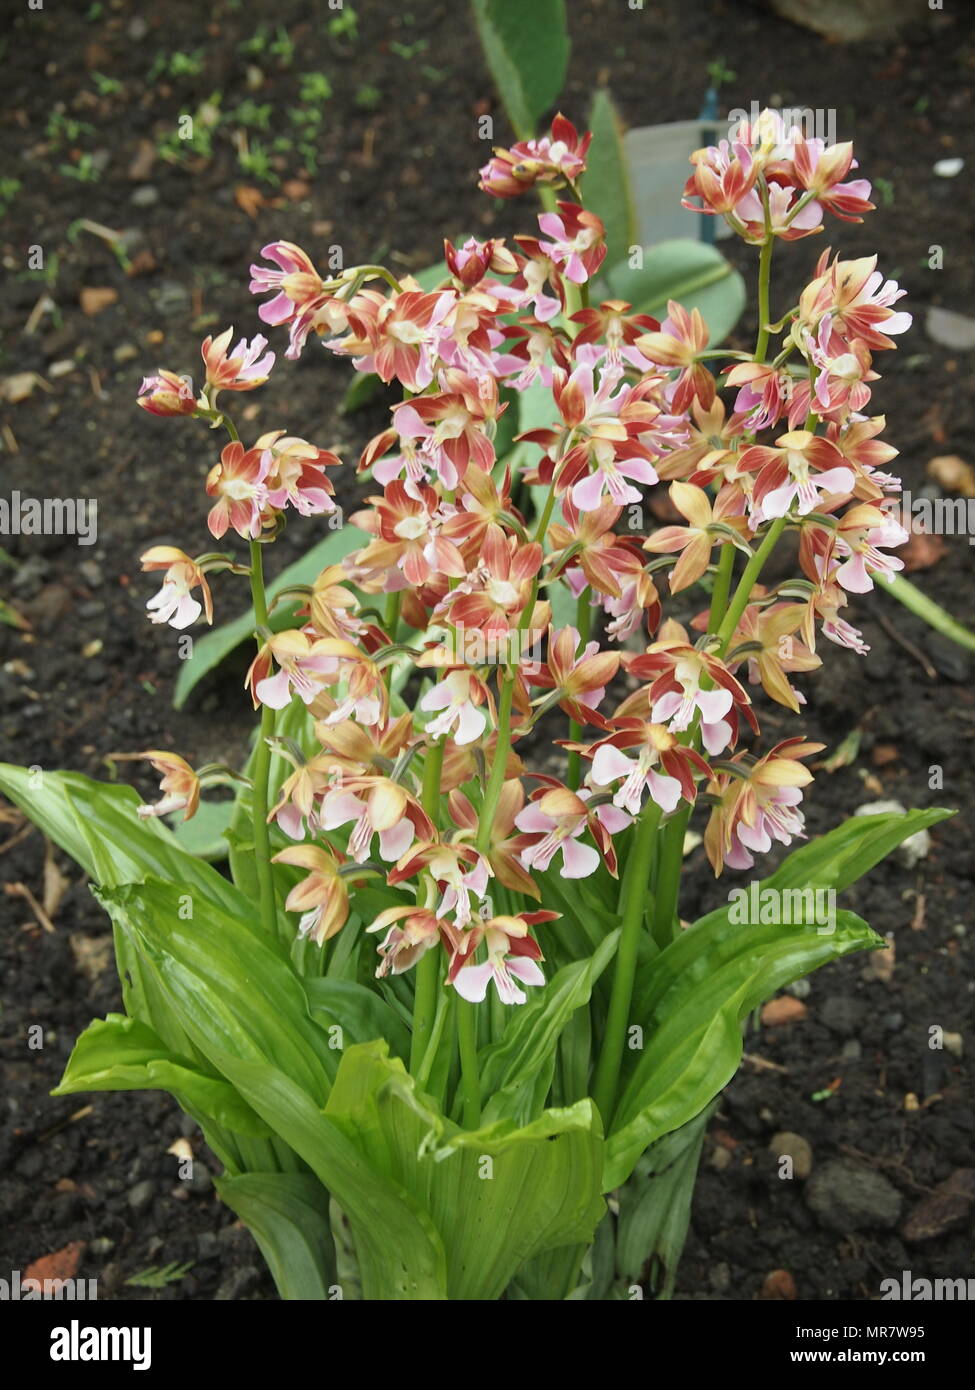 Calanthe orchid in flower Stock Photo